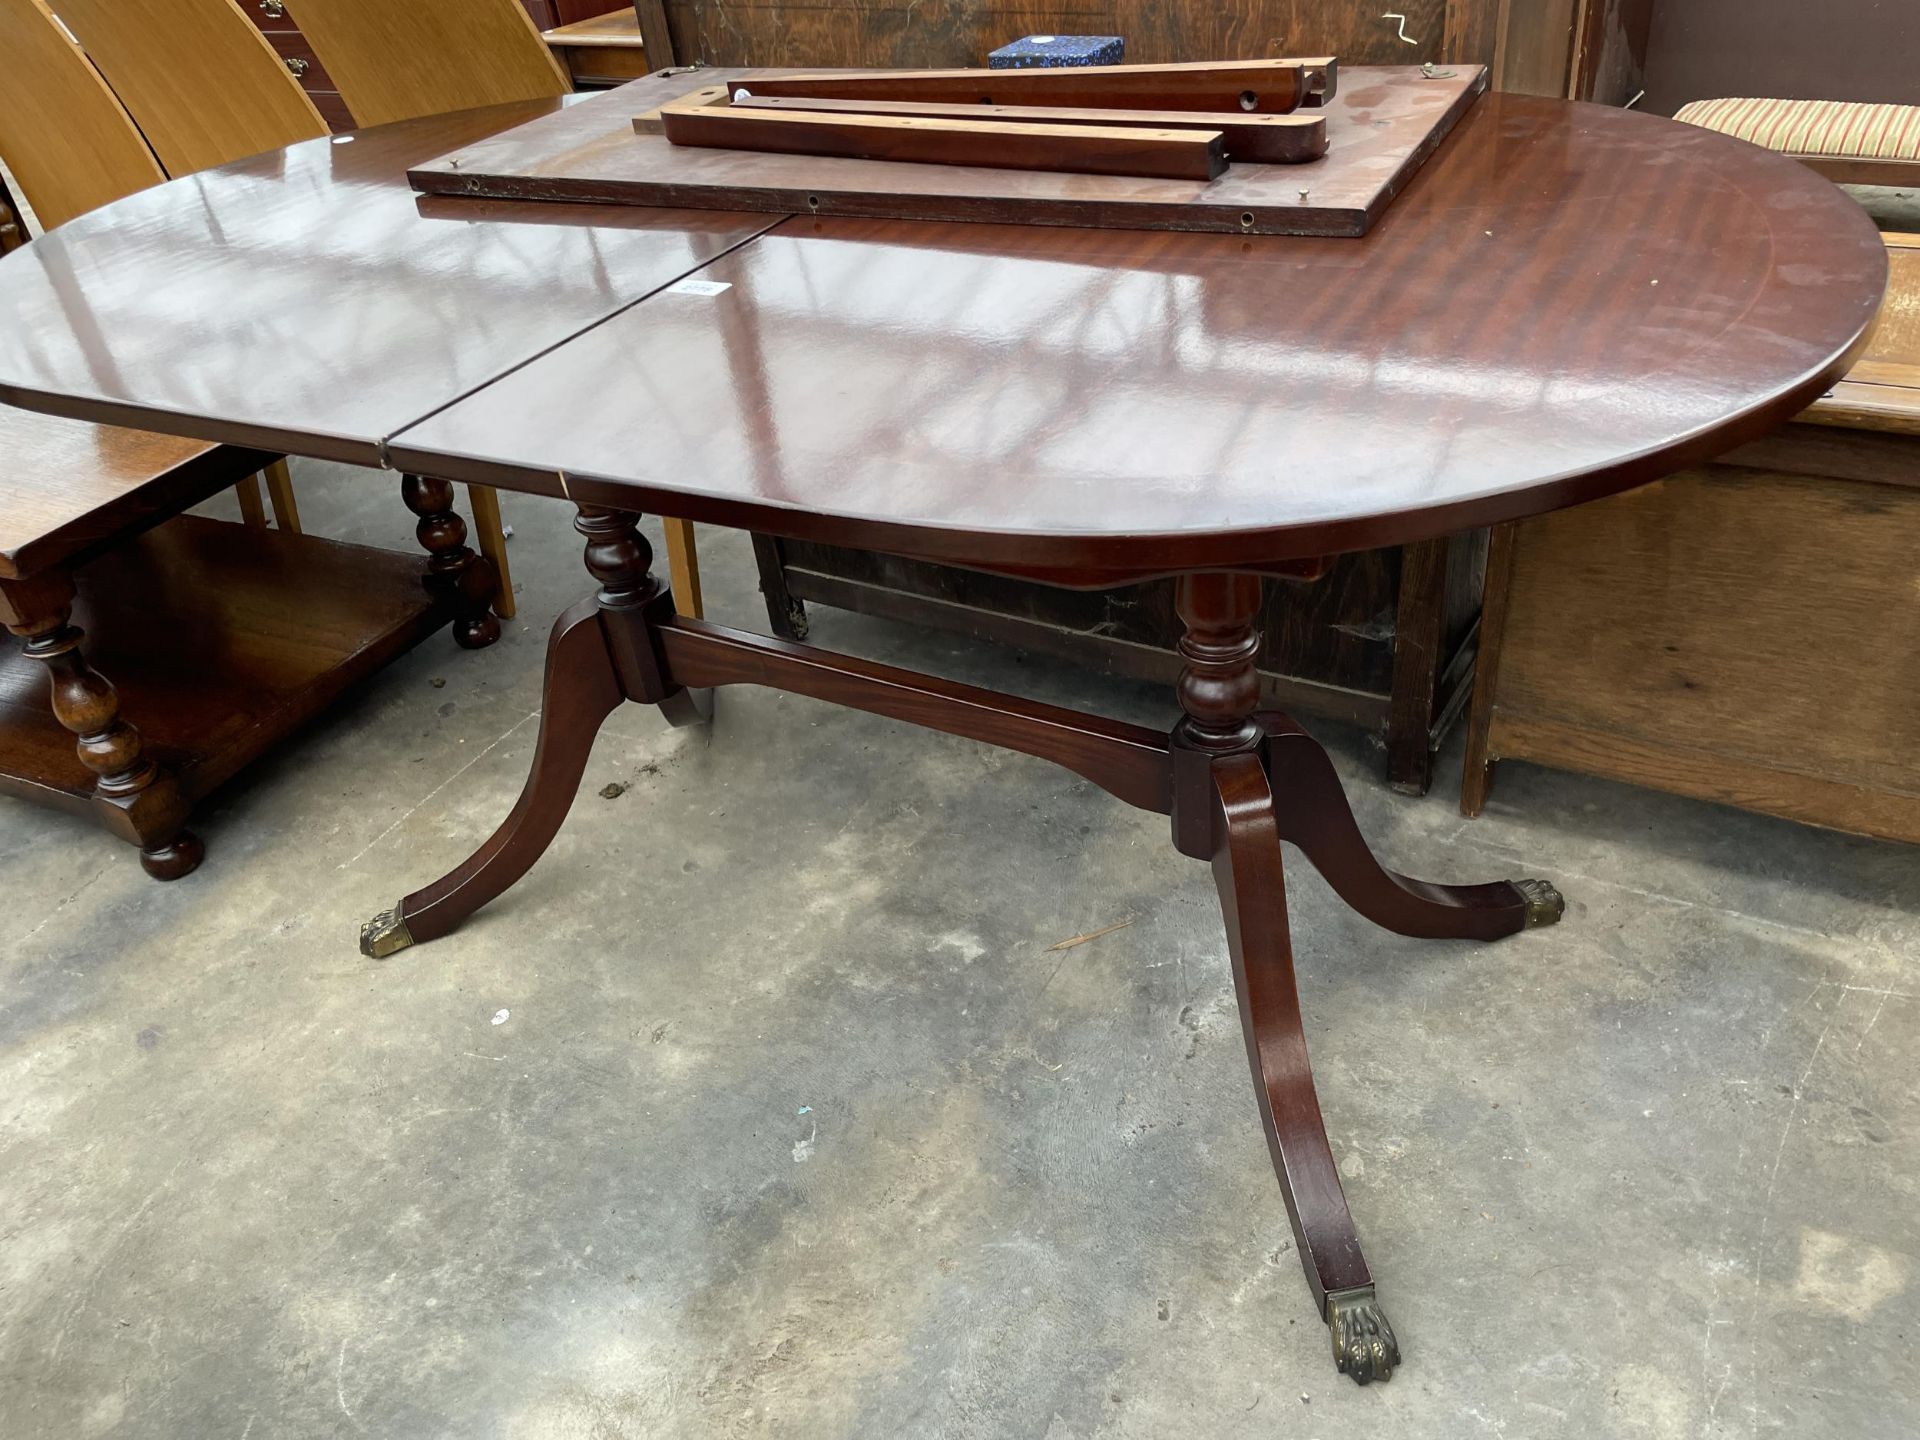 A REGENCY STYLE TWIN-PEDESTAL EXTENDING DINING TABLE, 55 X 32" (LEAF 14") - Image 2 of 3